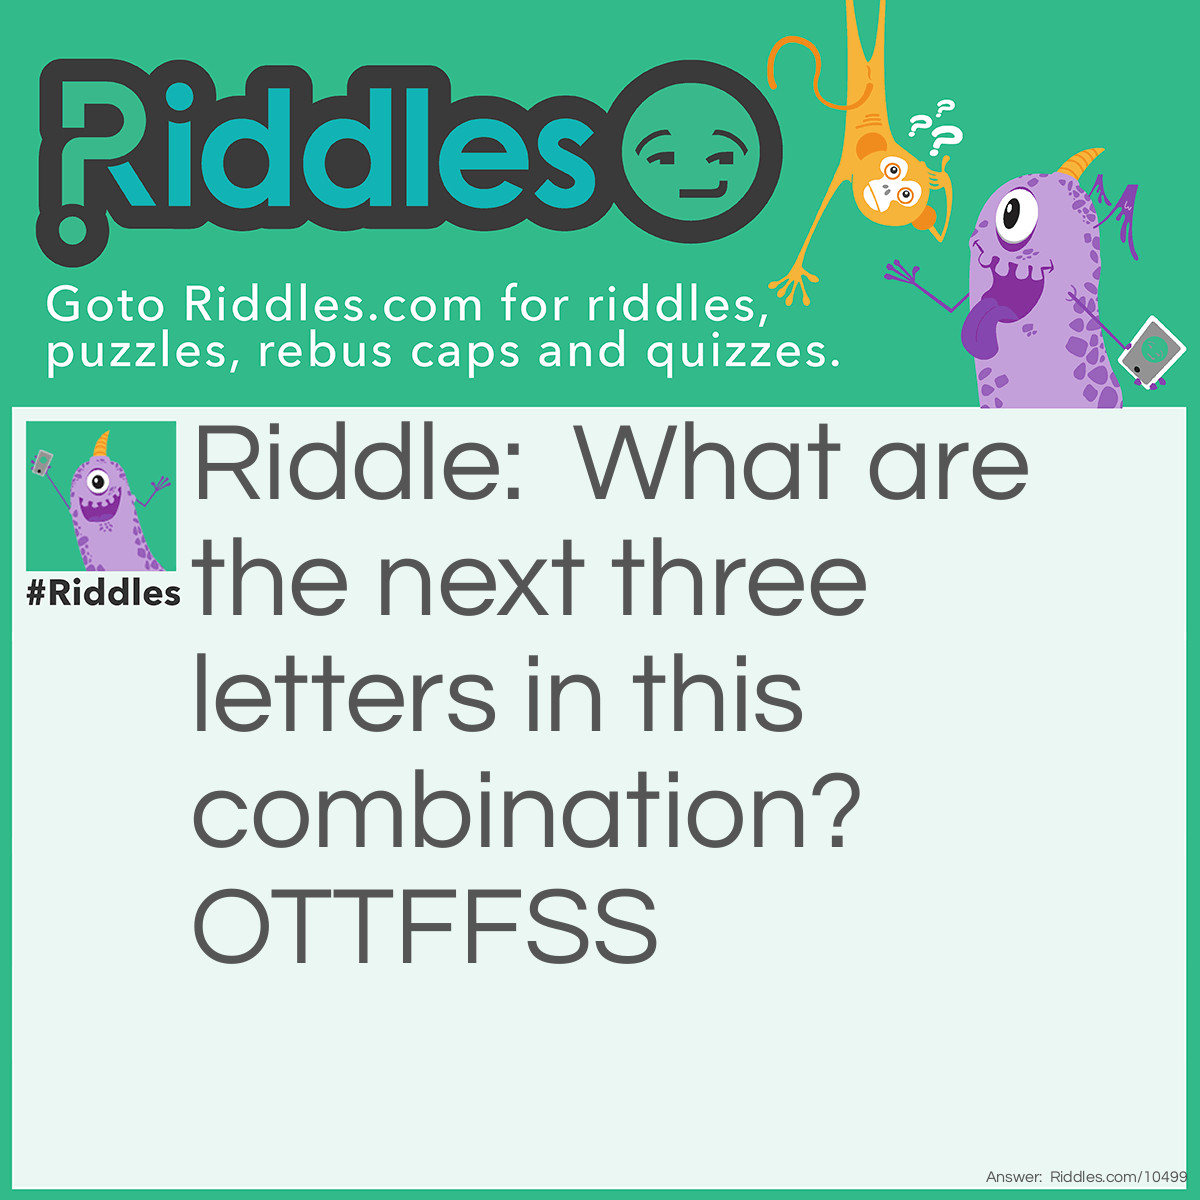 Riddle: What are the next three letters in this combination? OTTFFSS Answer: E N T (Each letter represents the first letter in the written numbers: One, Two, Three, Four, Five, etc.).